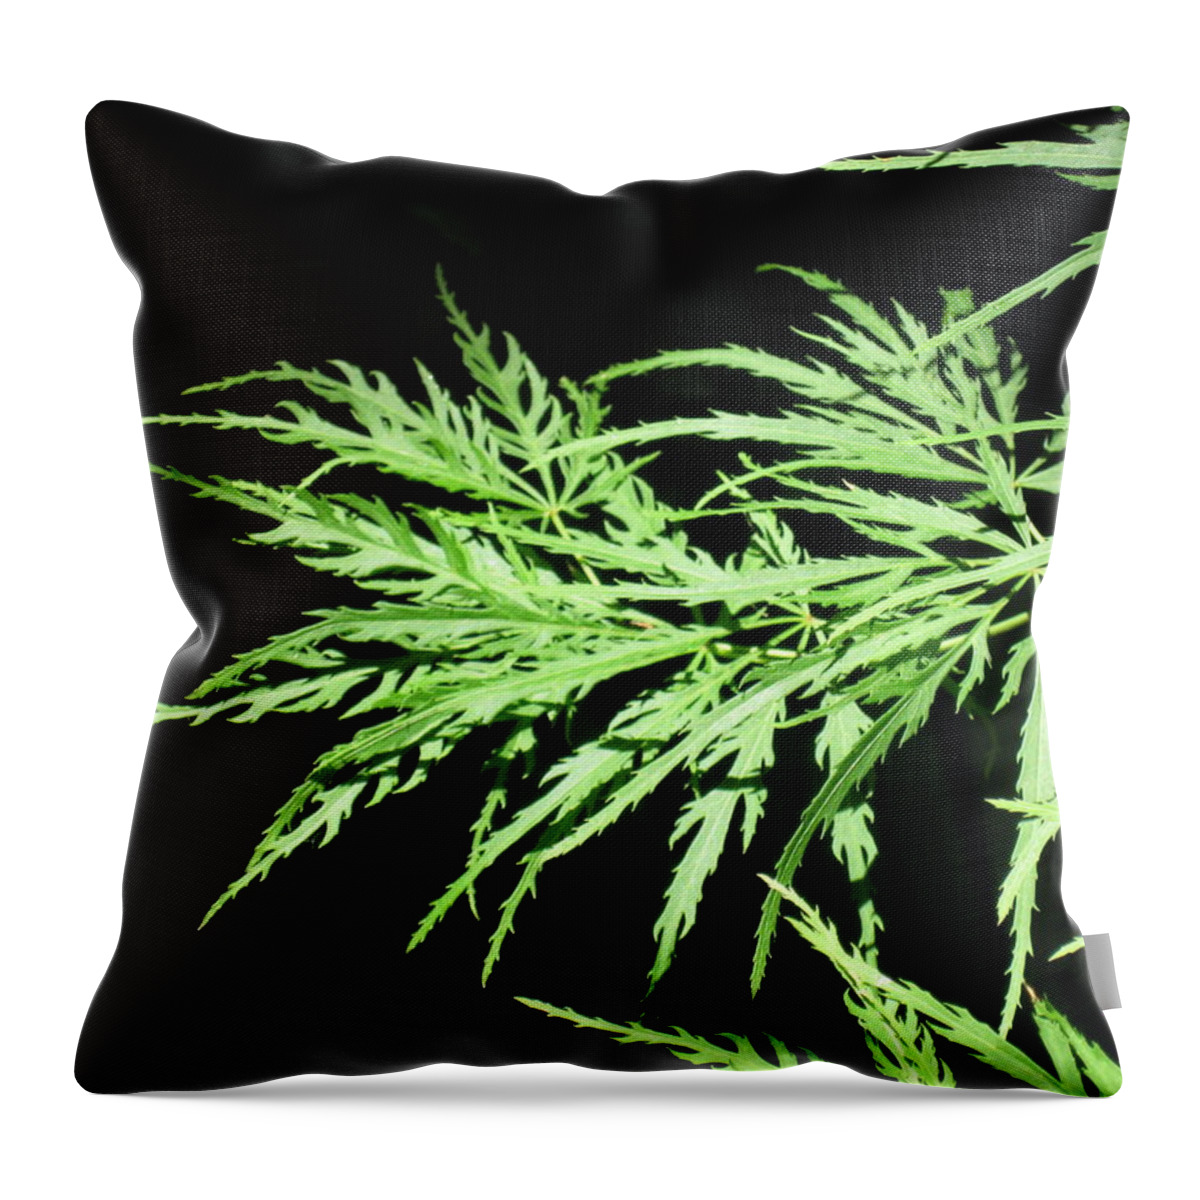  Throw Pillow featuring the photograph Tree Feathers by Ron Monsour